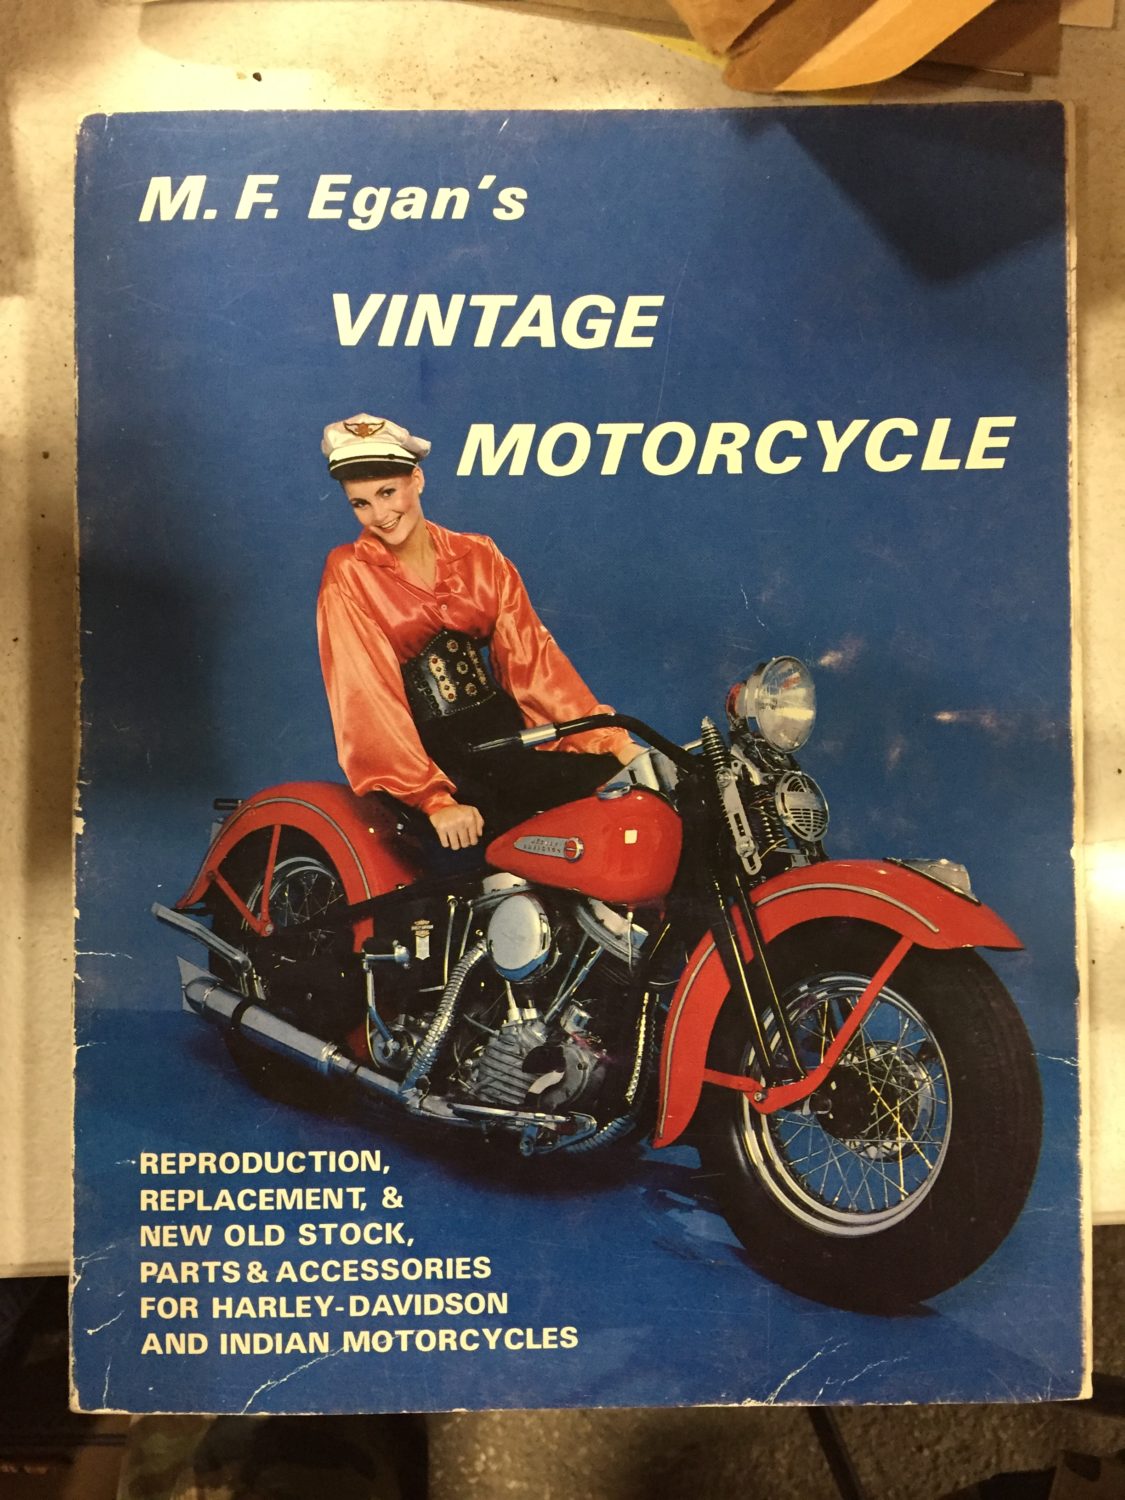 The K.C. Motorcycle Collection Auction- Motorcycles, Memorabilia, and HUGE Harley DavidsonParts Stash! - image 30